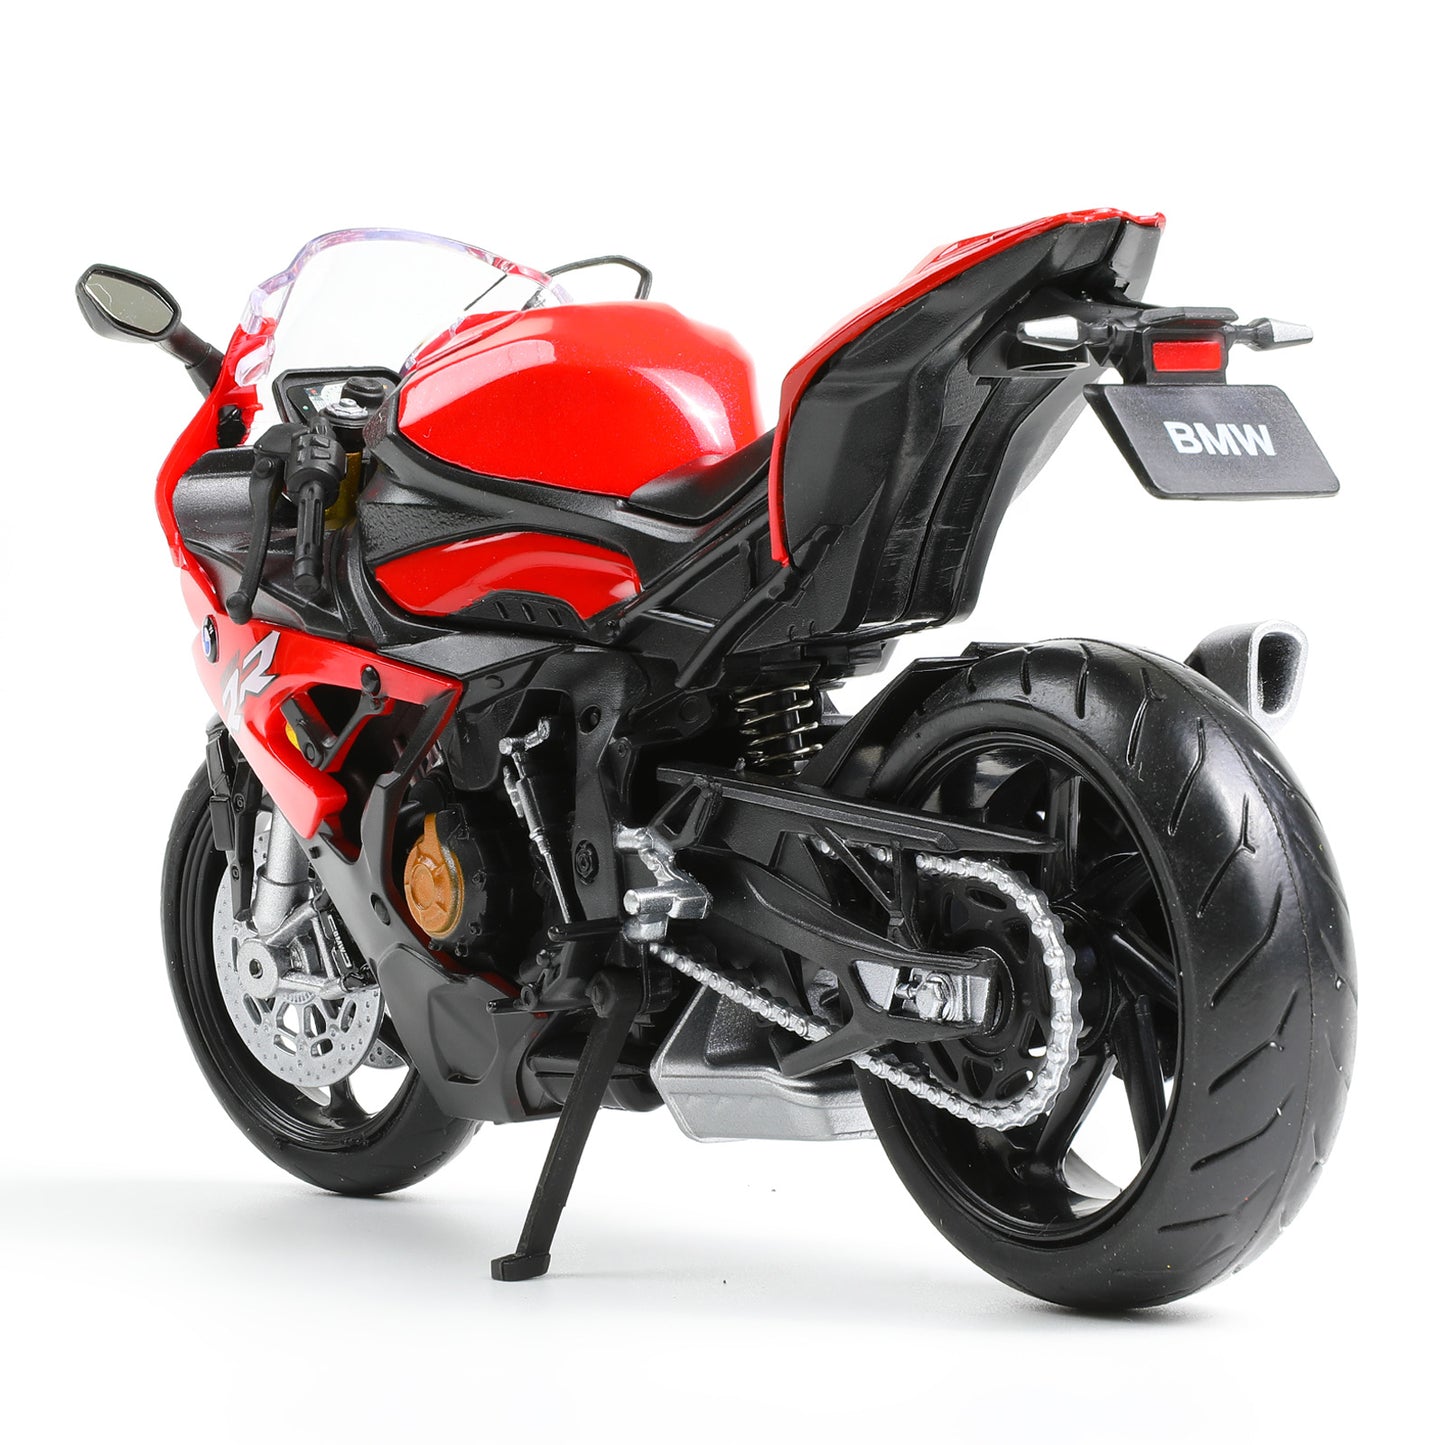 DieCast Motorcycle Model for BMW S1000RR, Realistic Motorcycle Metal Model, 1:12 Scale Kids Moto Toy or Collection,MAKEDA Pre-Built Toys Gift